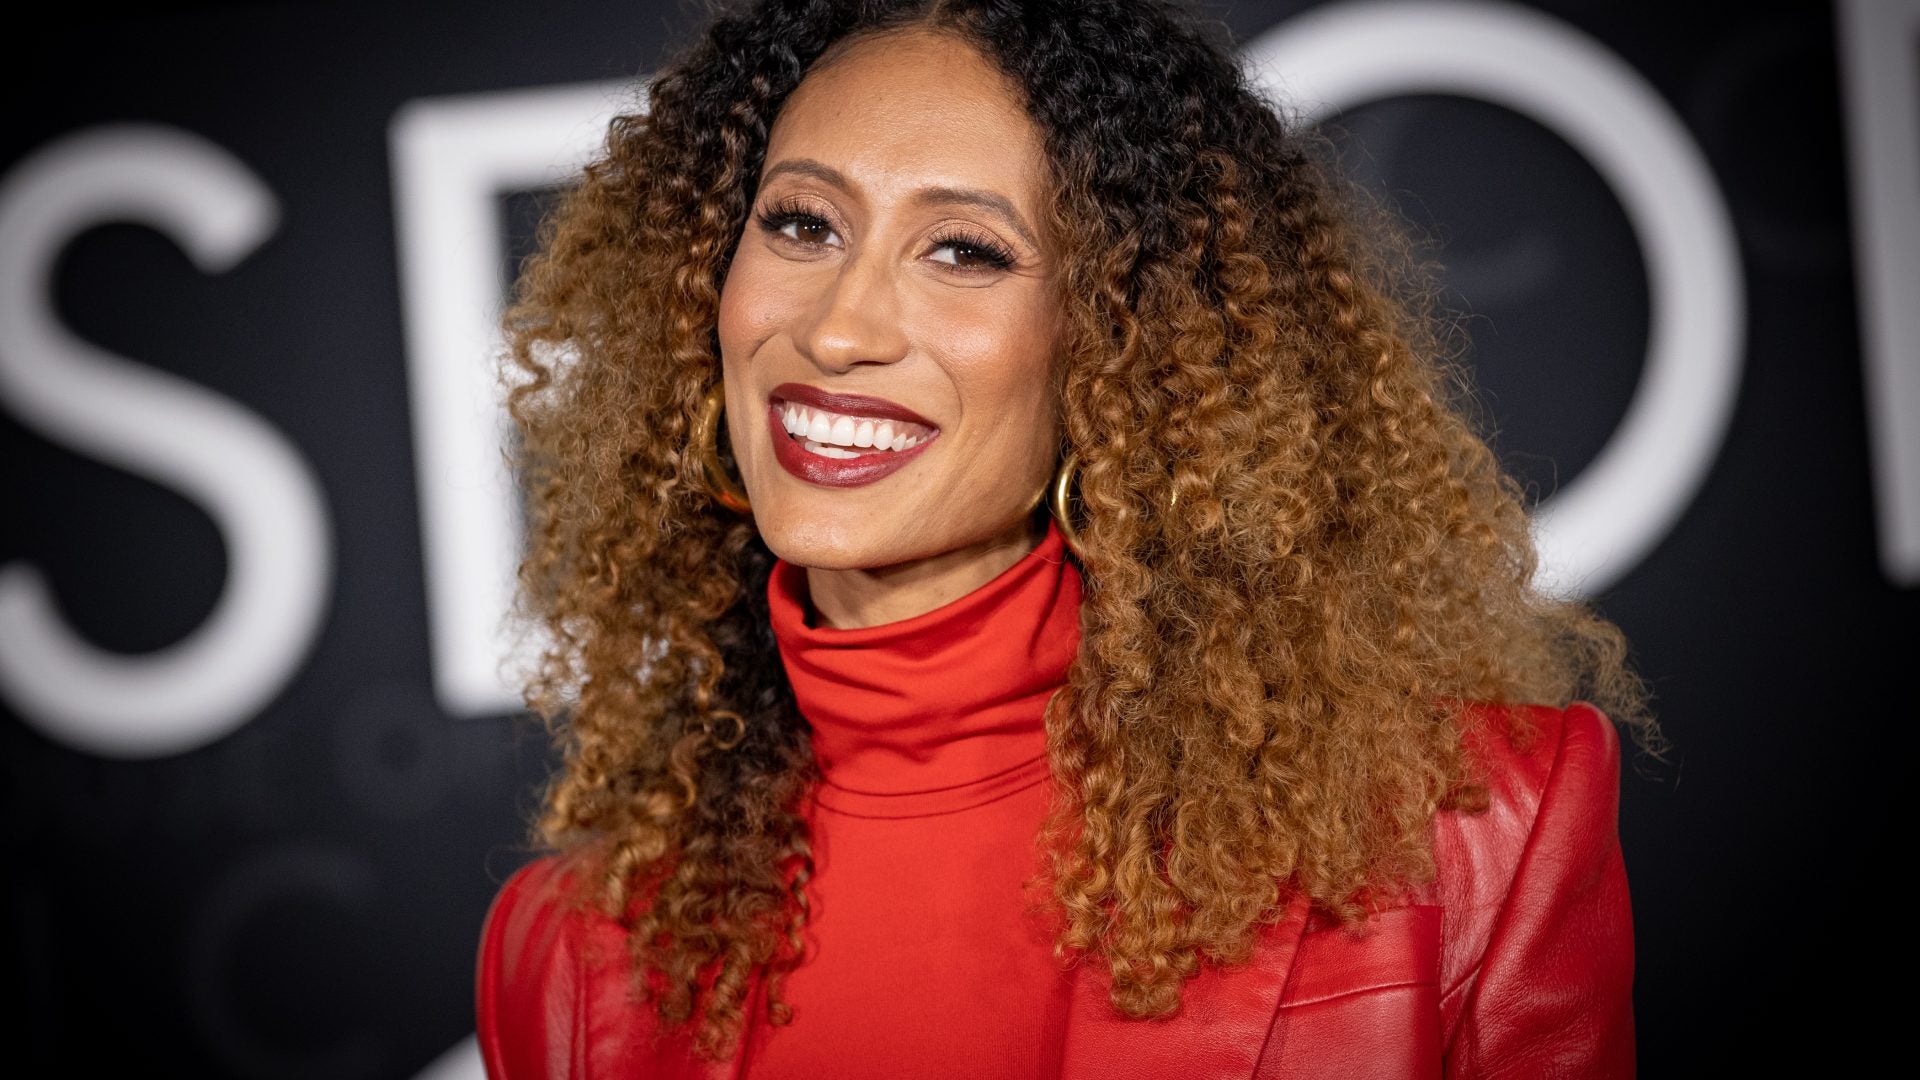 Elaine Welteroth Gives Birth To A Baby Boy: 'Look Who Finally Made His Debut'